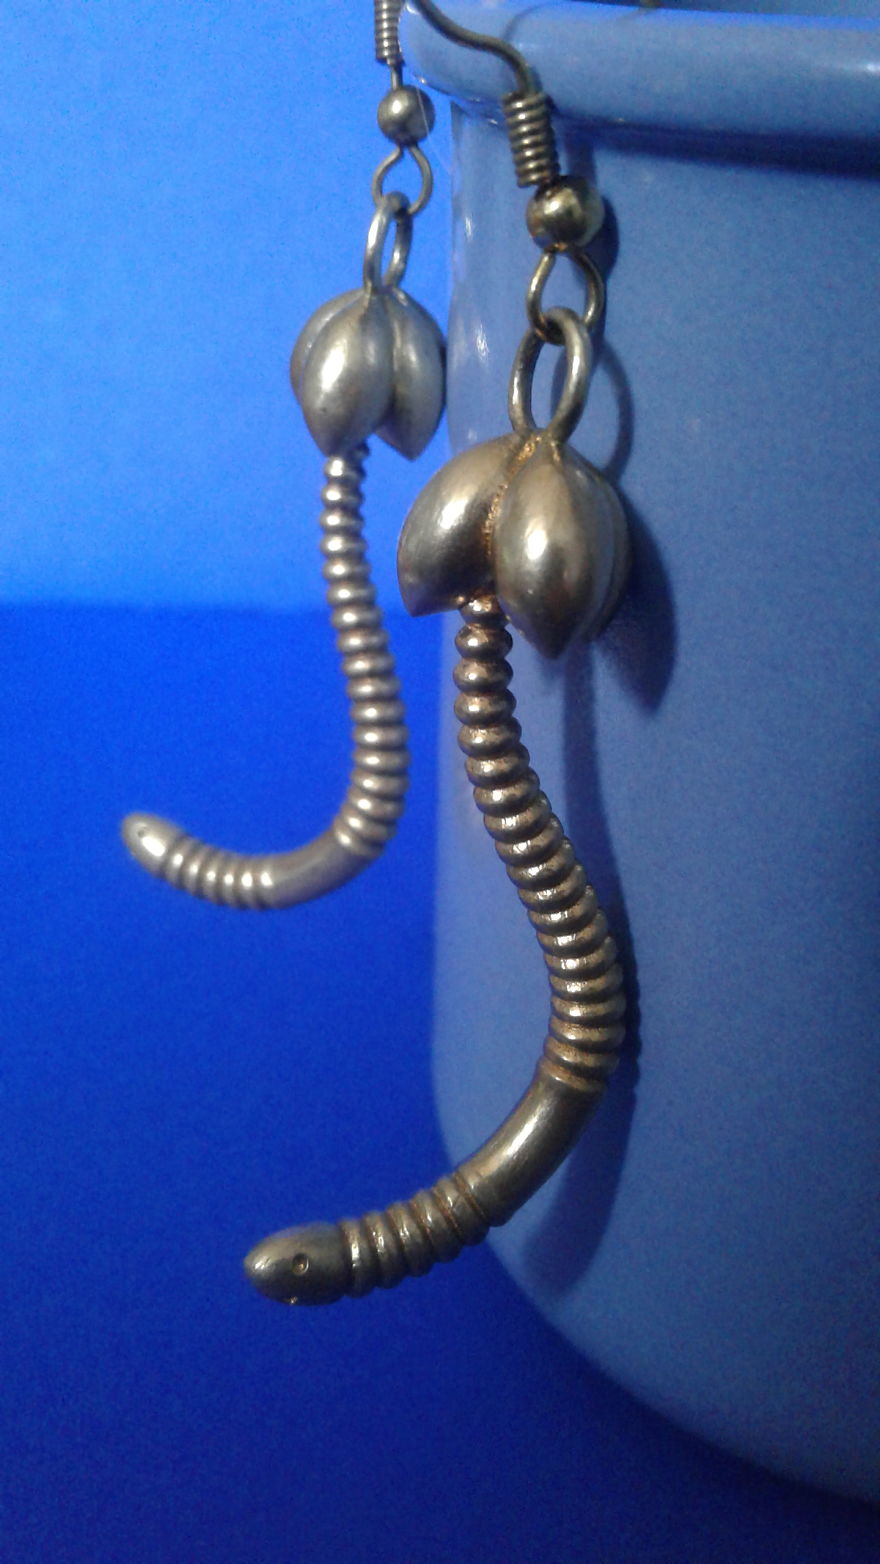 My 3d Printed Jewellery Collection Tells The Story Of A Lonely Worm Who Meets His Soil Mate...